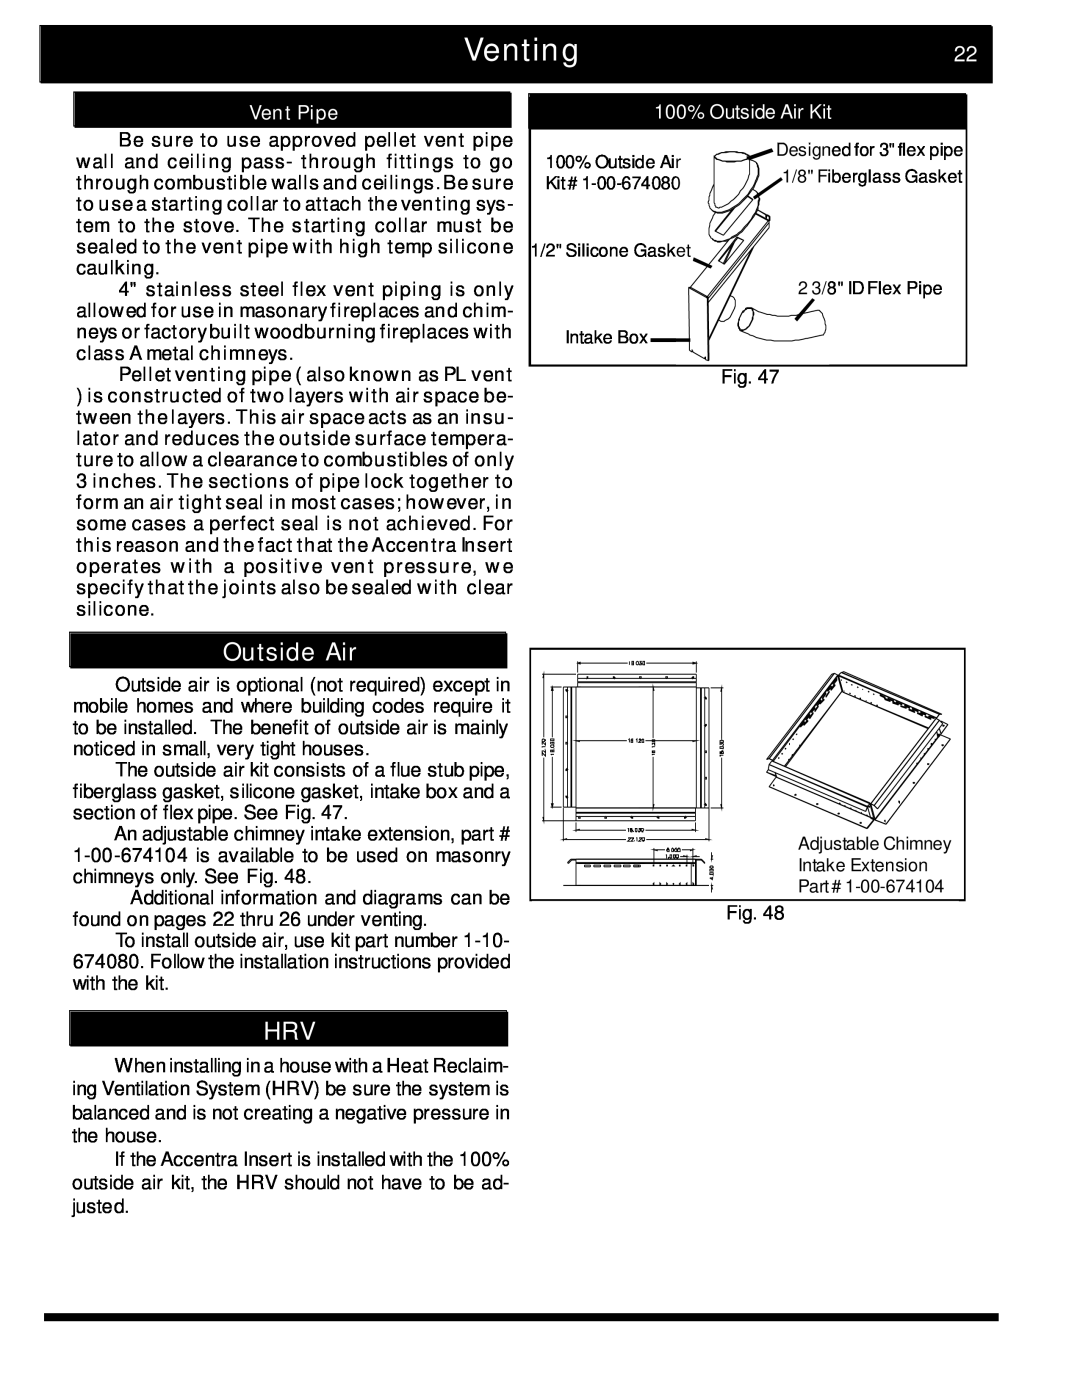 Harman Stove Company The Harman Accentra Pellet Insert manual Venting22, Vent Pipe, 100% Outside Air Kit 